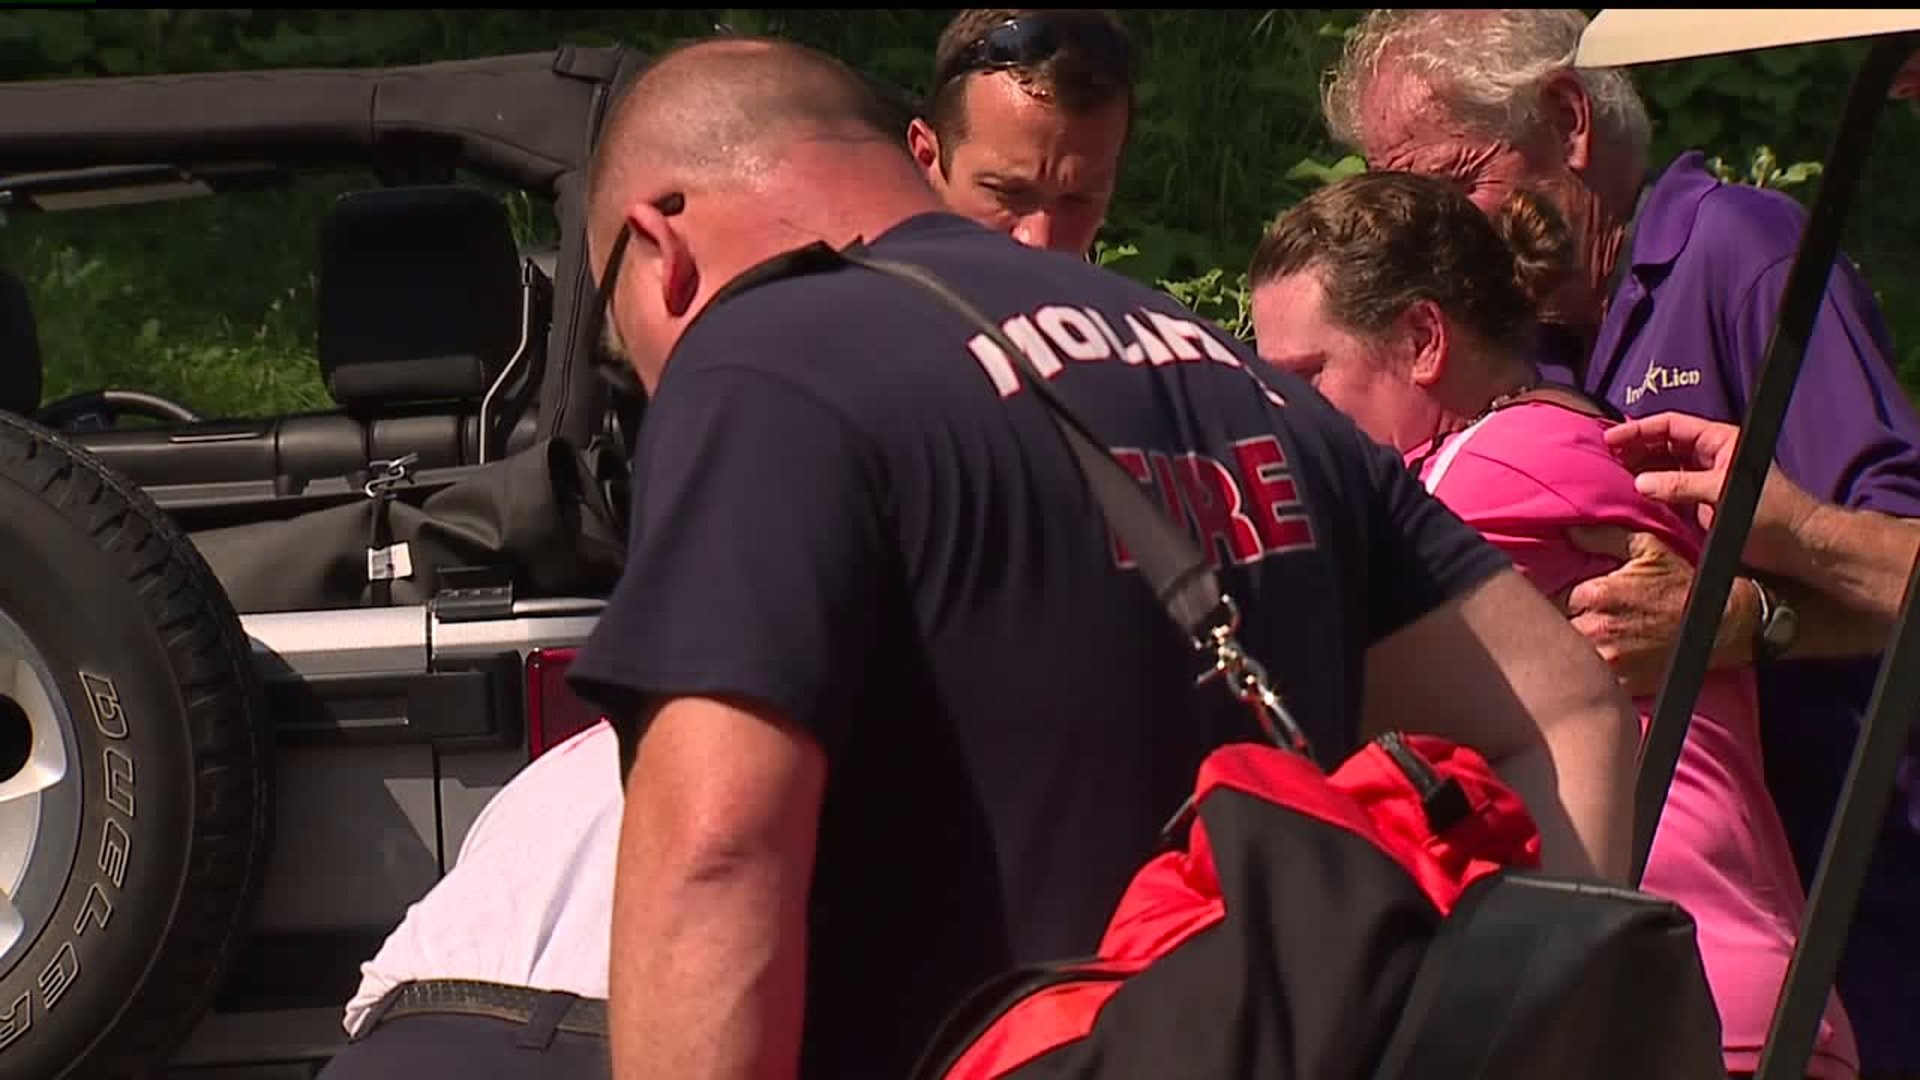 Woman hospitalized with possible heat exhaustion